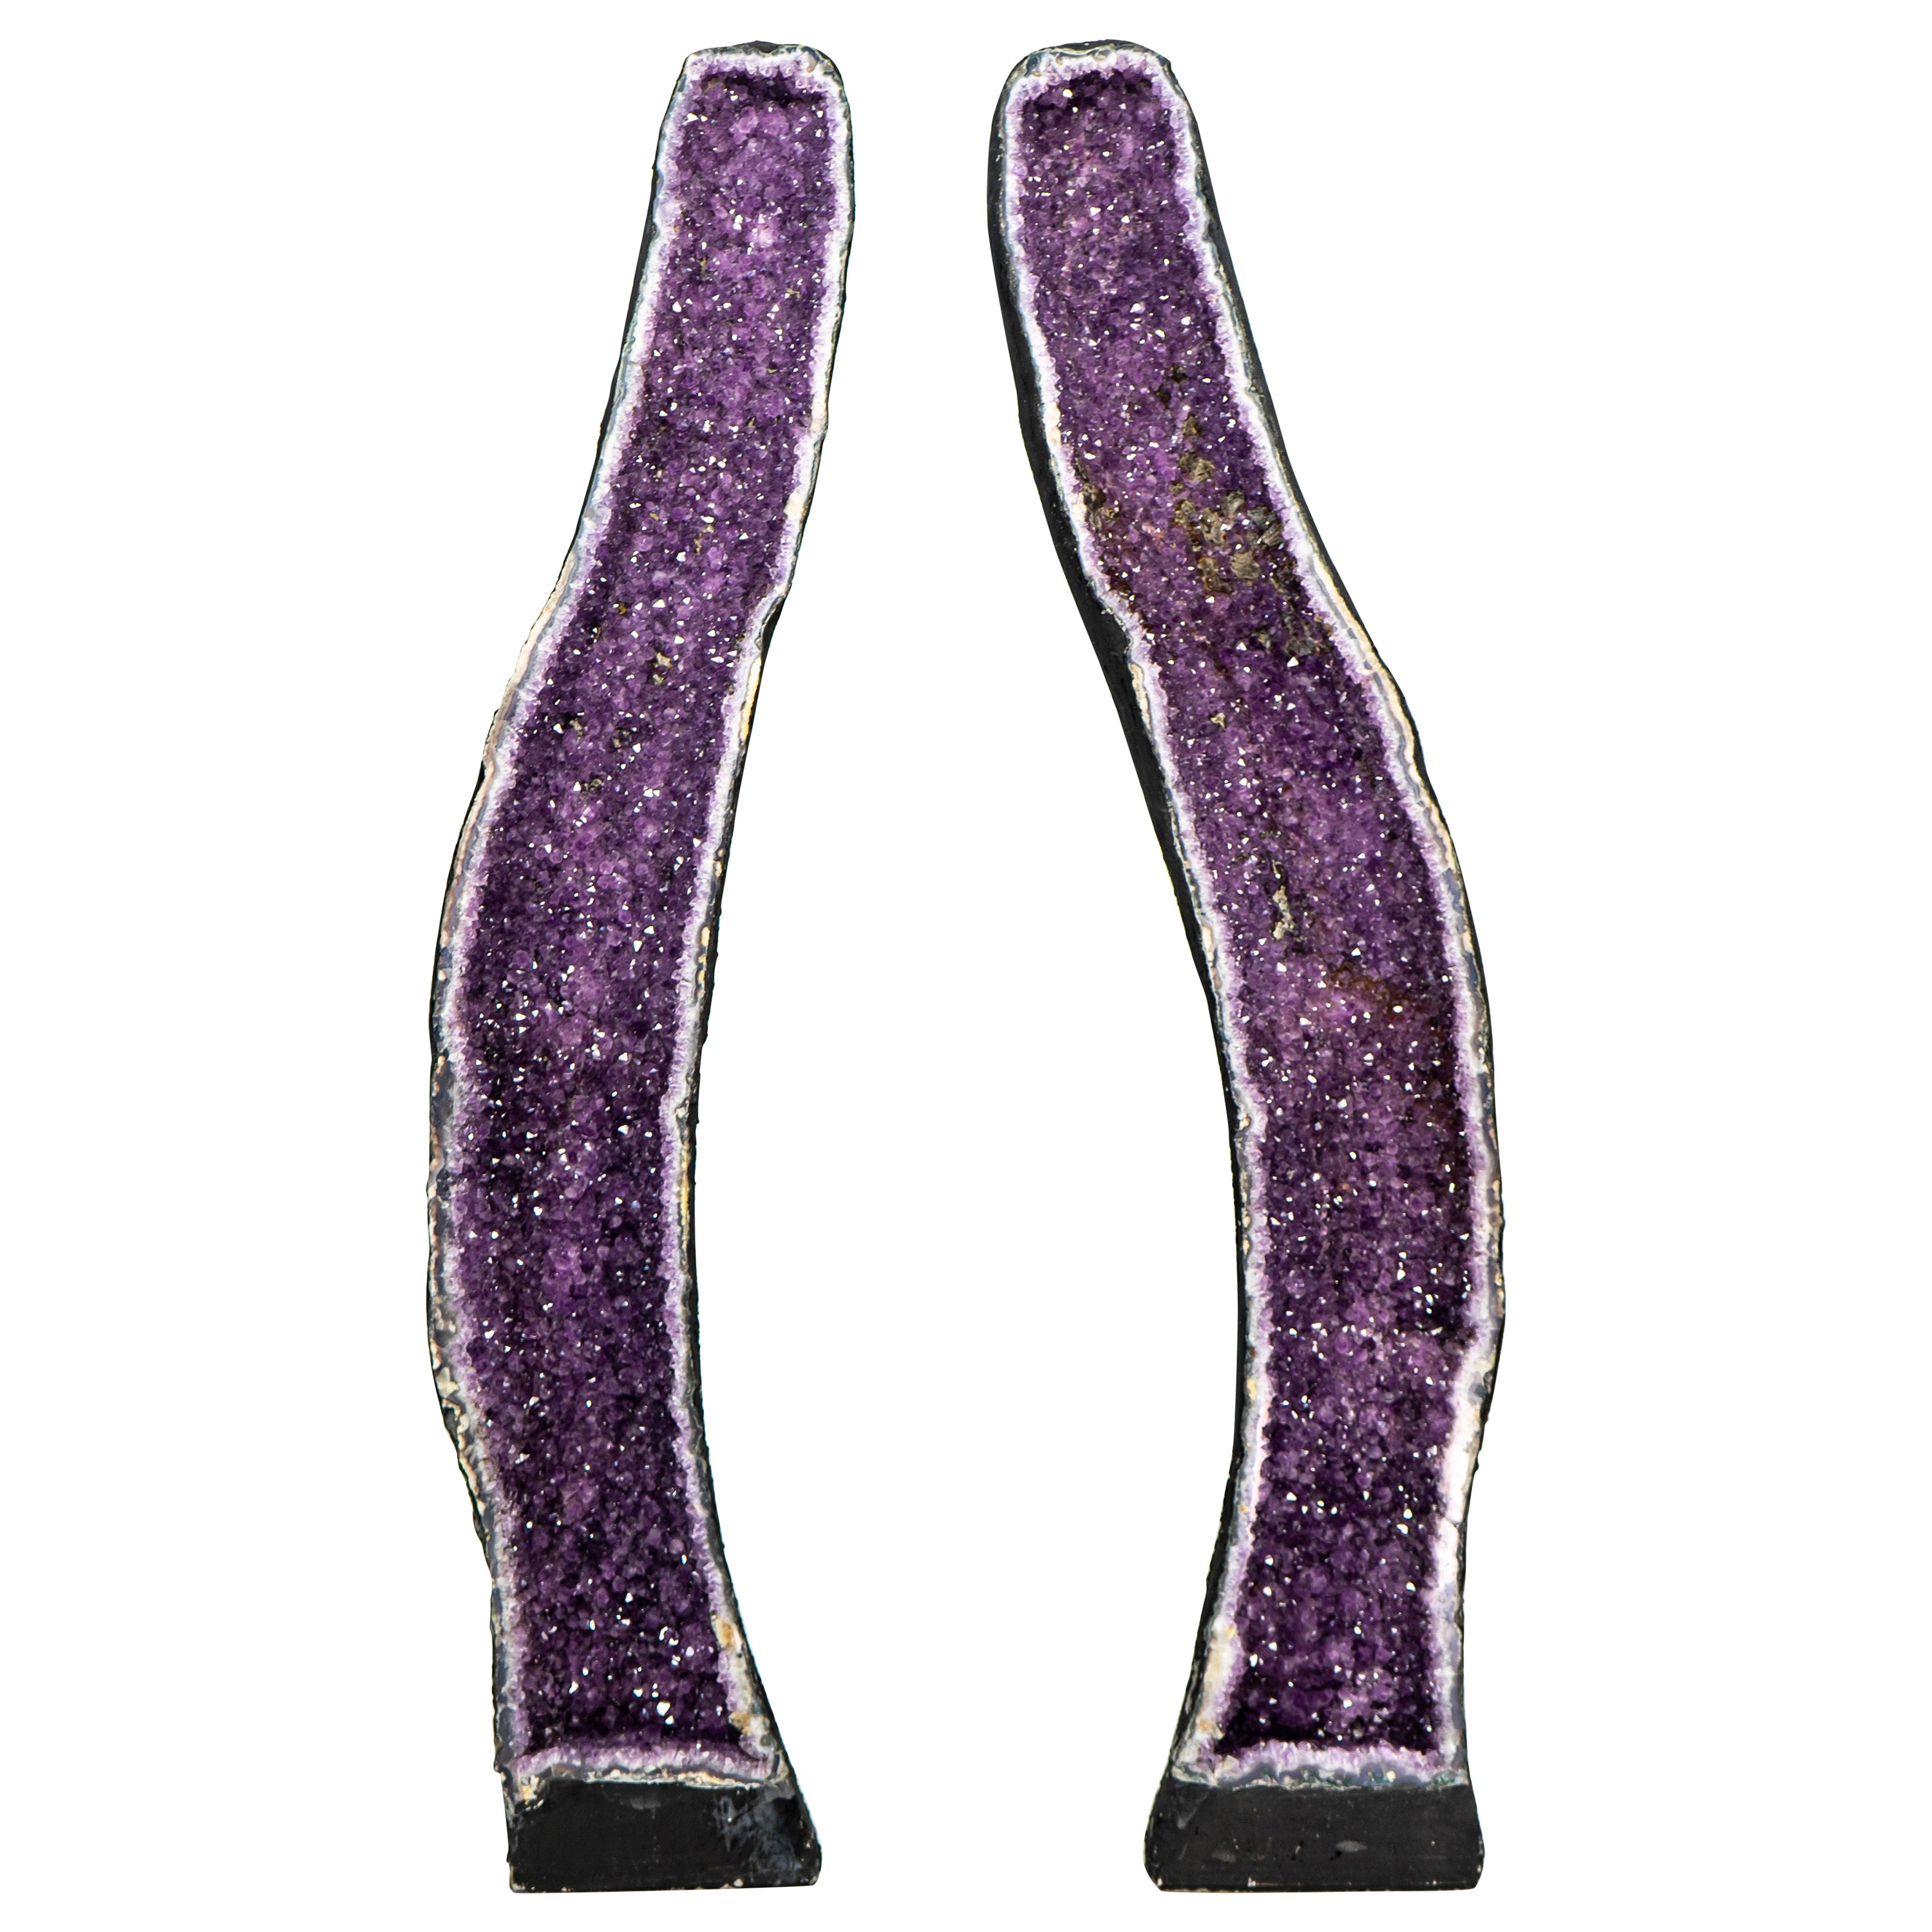 Pair of Purple, X-Tall Amethyst Geode Cathedrals Formed in Archway